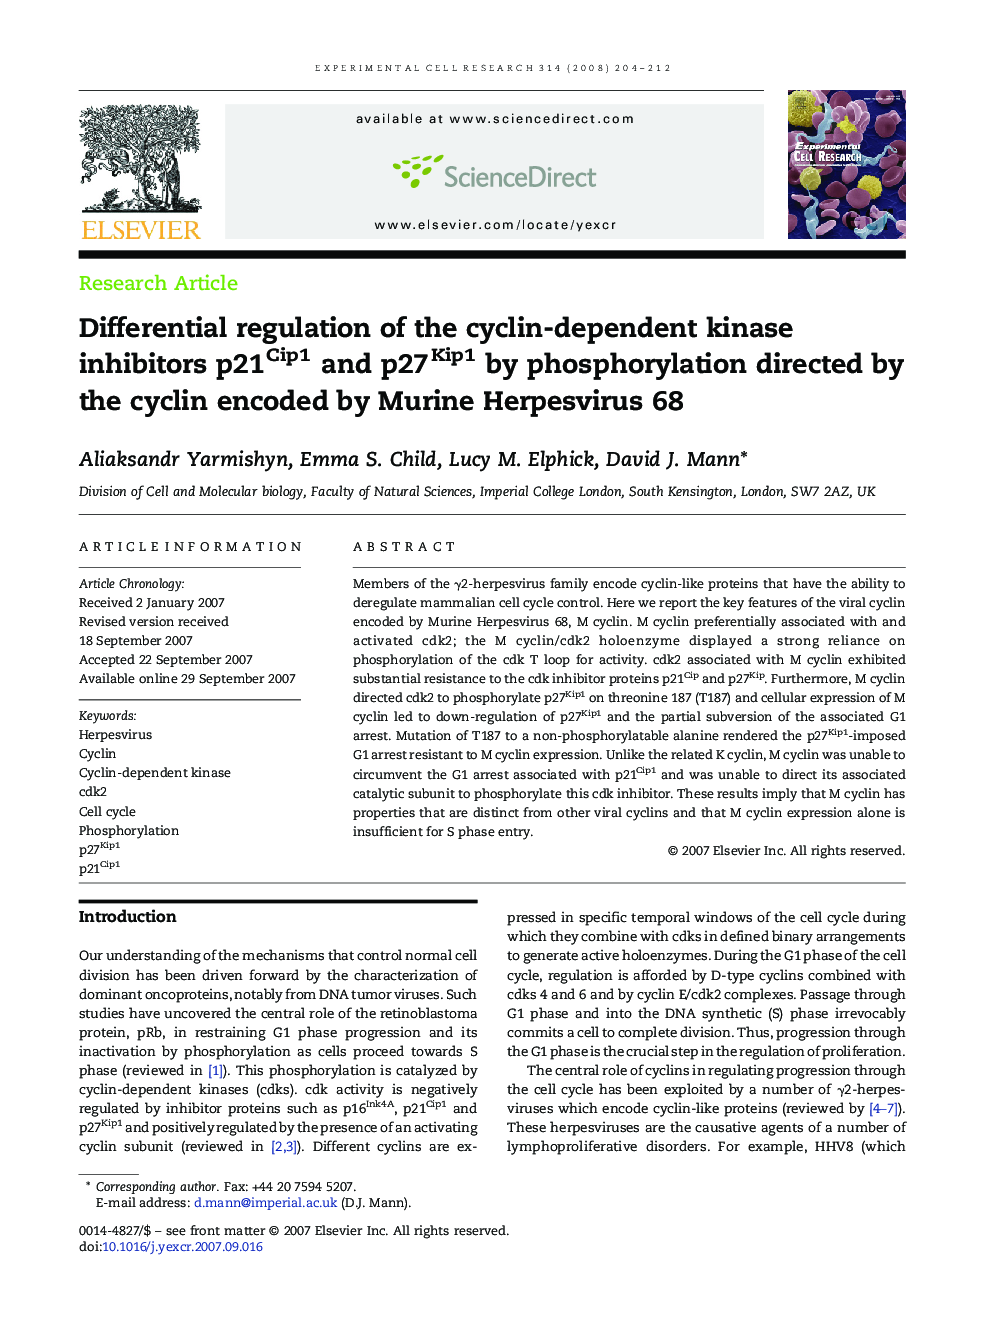 Differential regulation of the cyclin-dependent kinase inhibitors p21Cip1 and p27Kip1 by phosphorylation directed by the cyclin encoded by Murine Herpesvirus 68